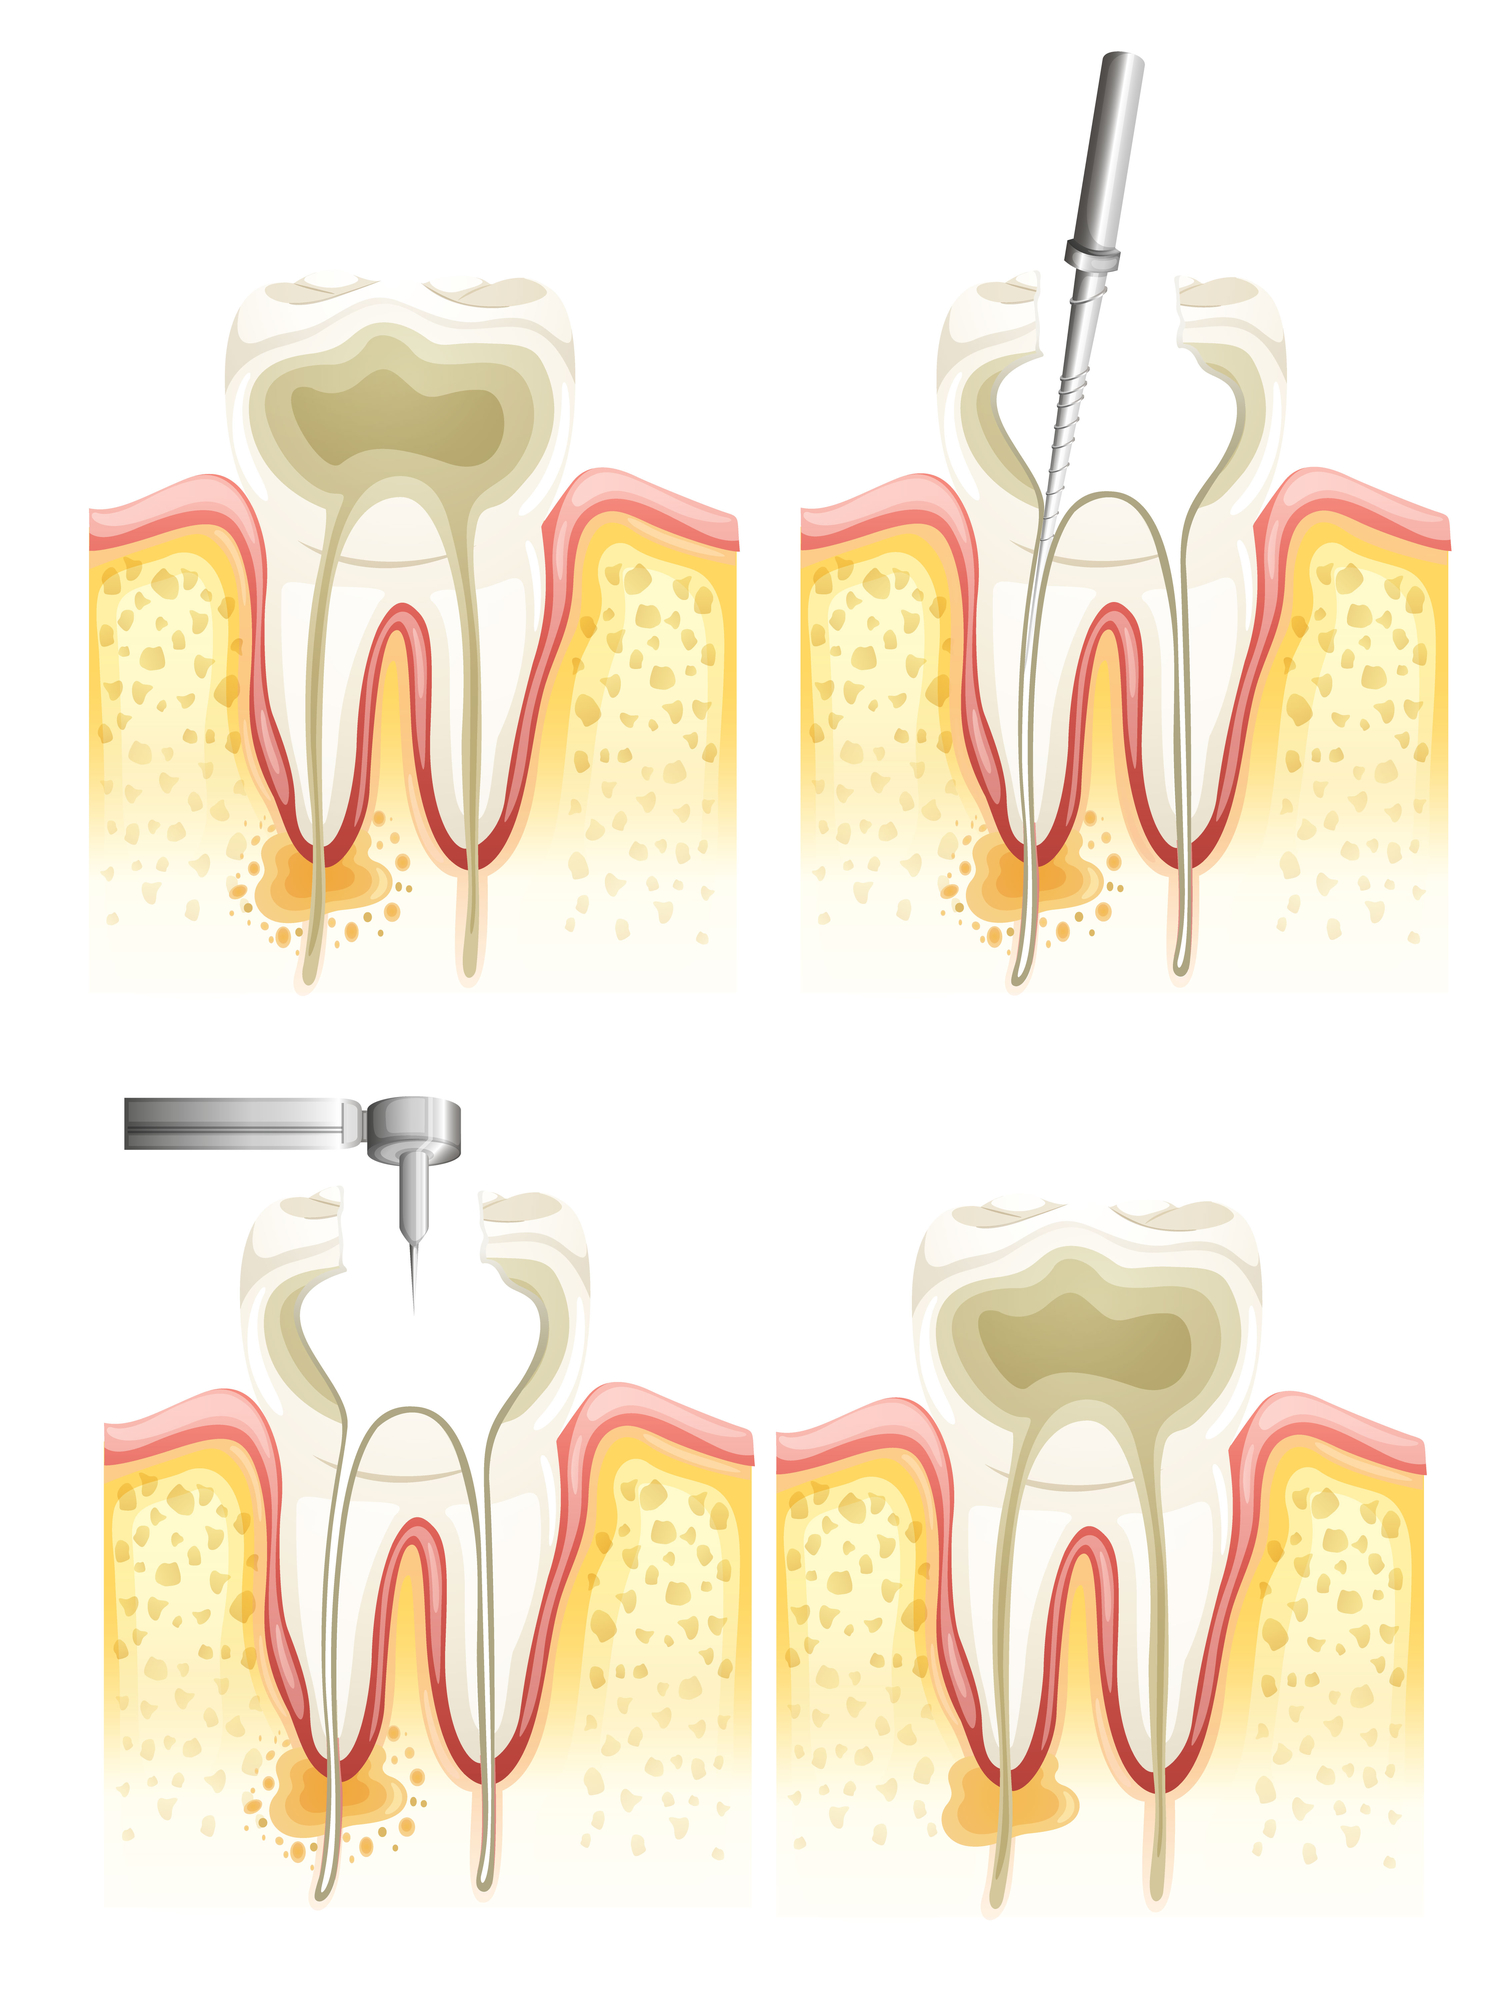 Who is the best dentist for a root canal in Doral?